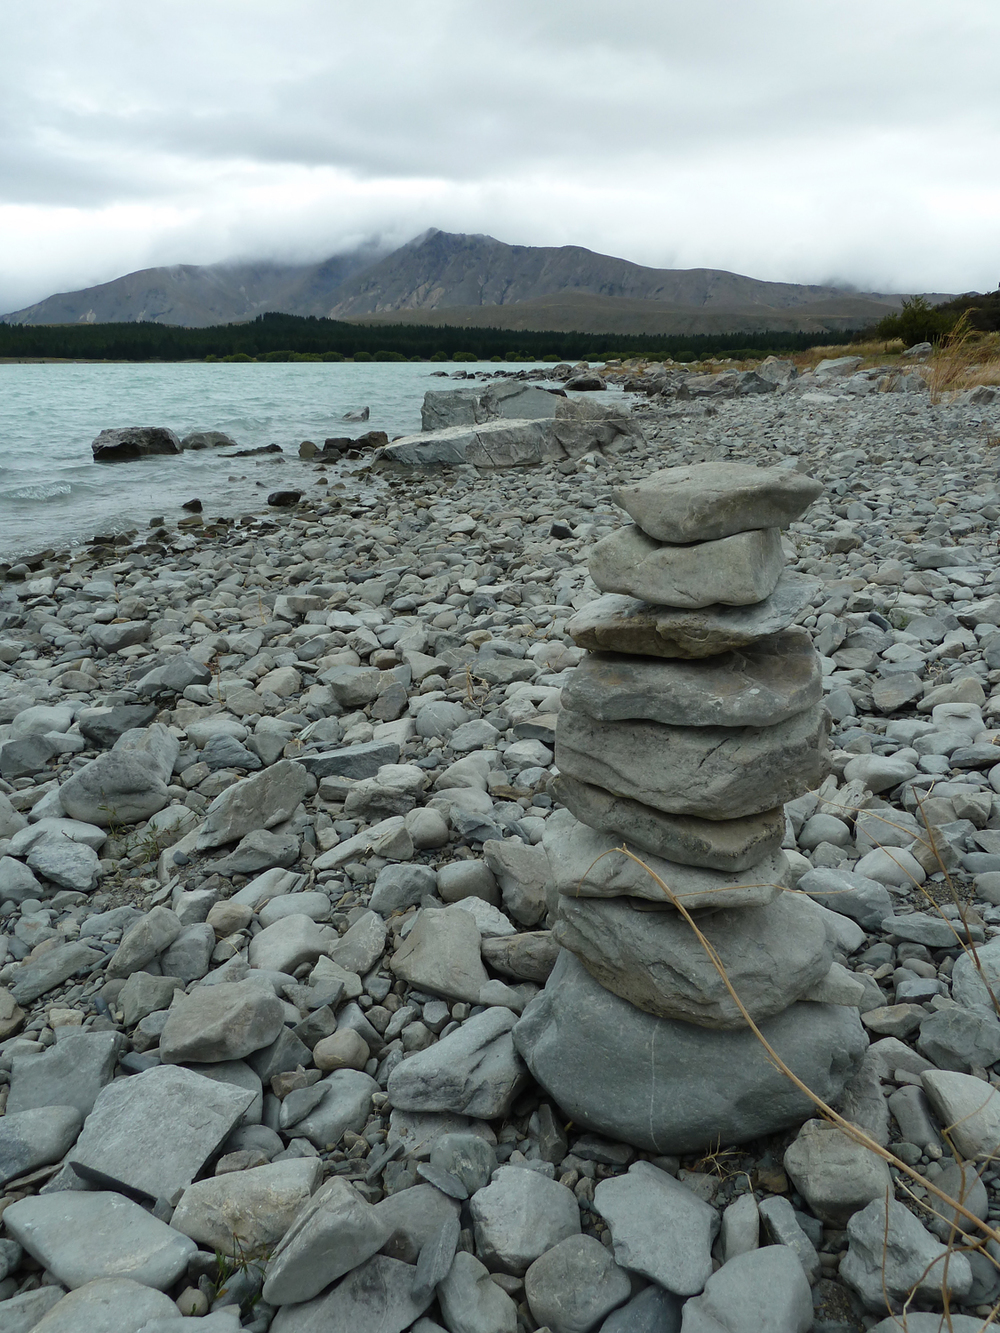 A Cairn-ucopia of Beauty